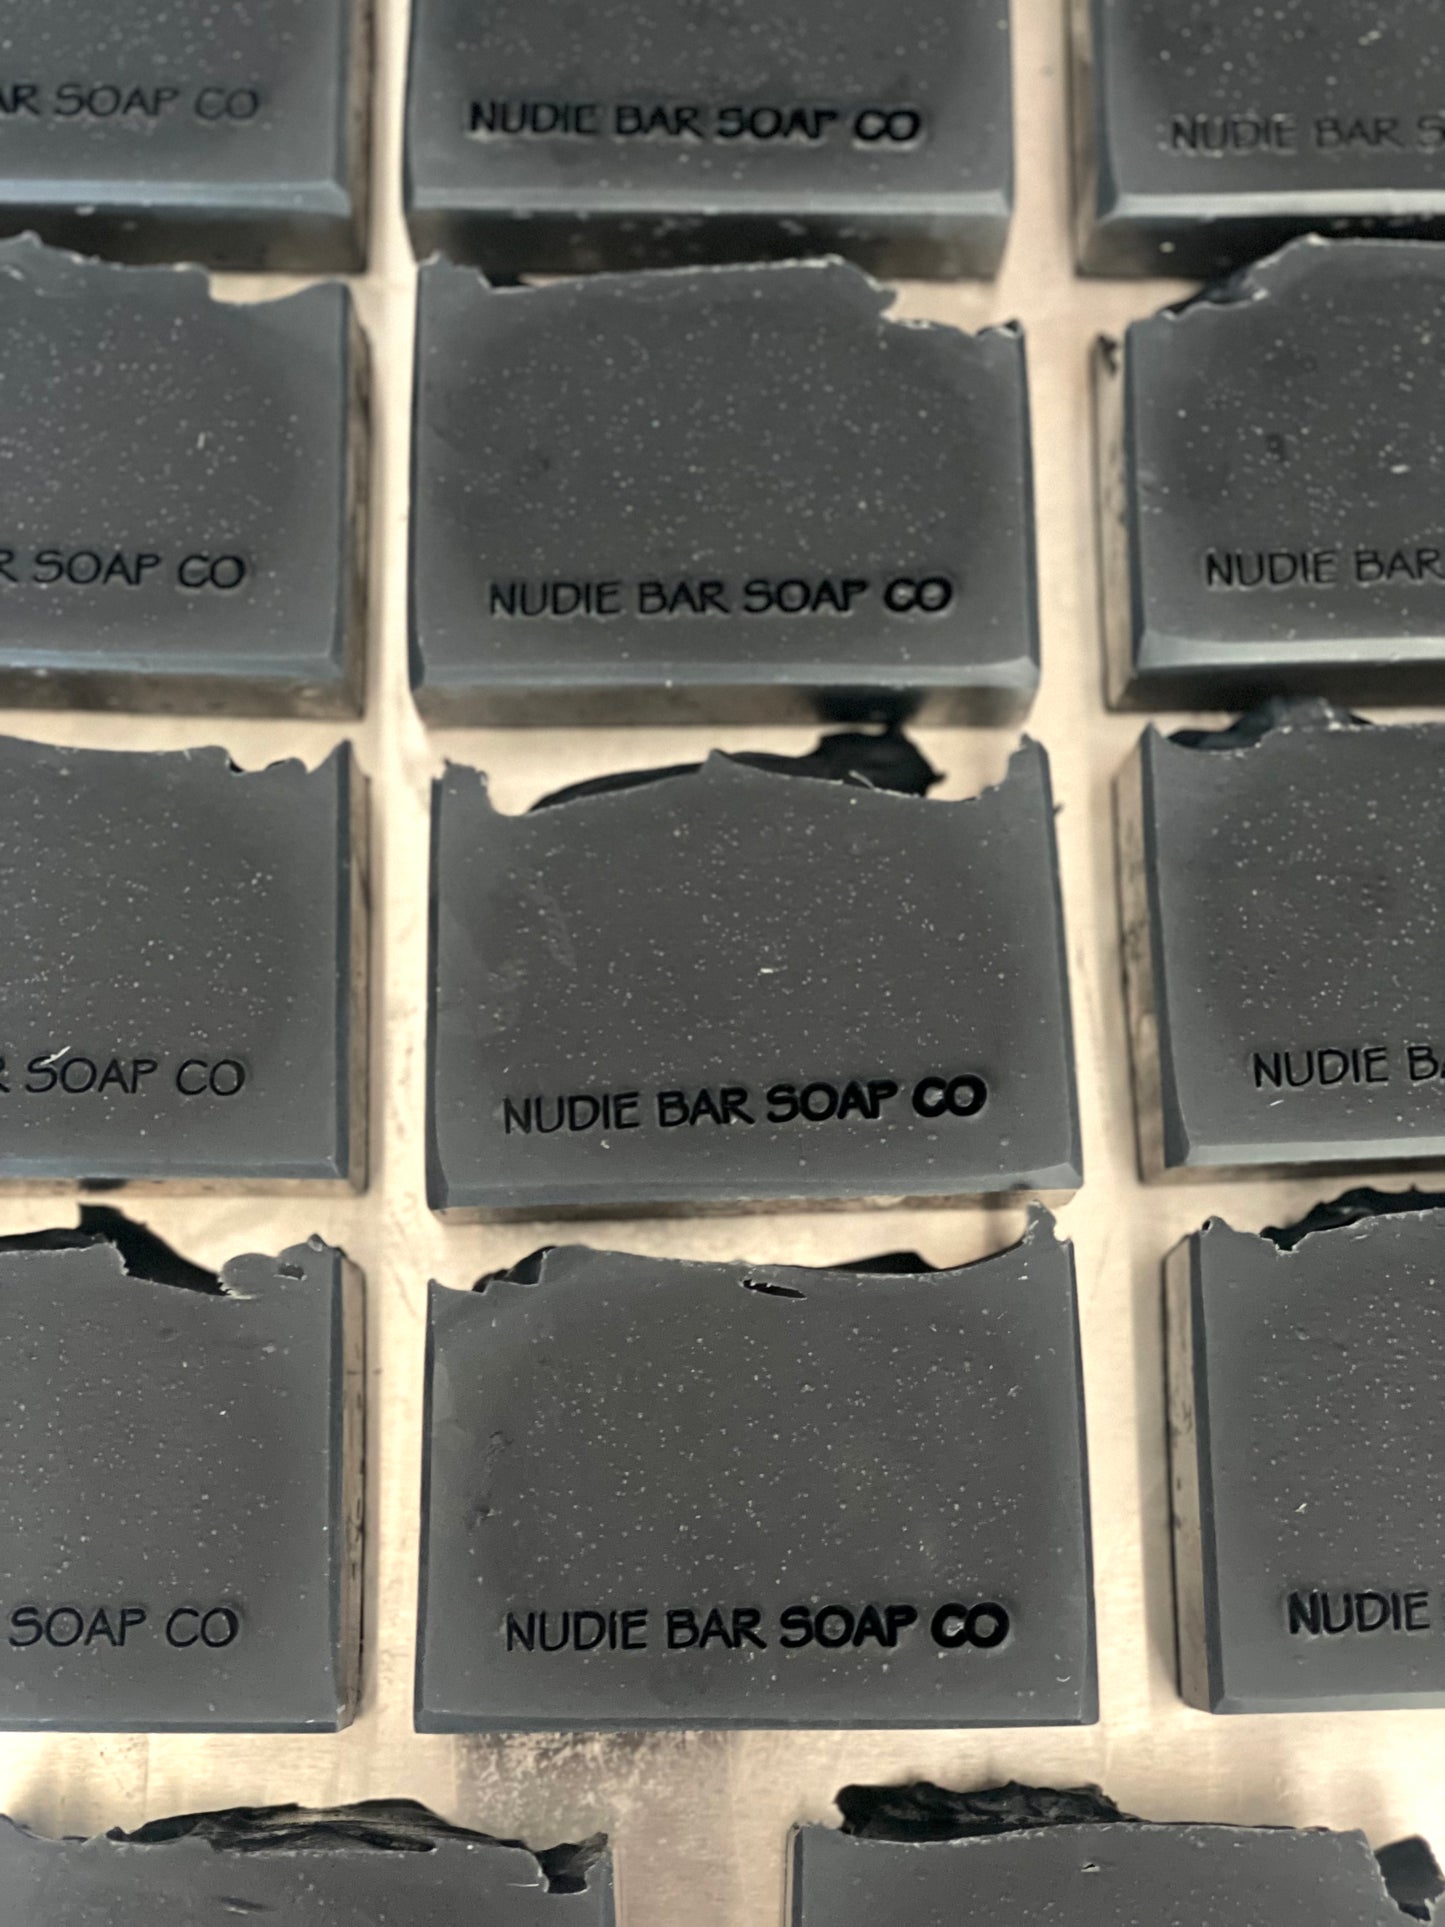 BLACK WOODS BAR SOAP-PRE ORDER AVAILABLE FOR DELIVERY/PICK UP JUNE 10, 2024